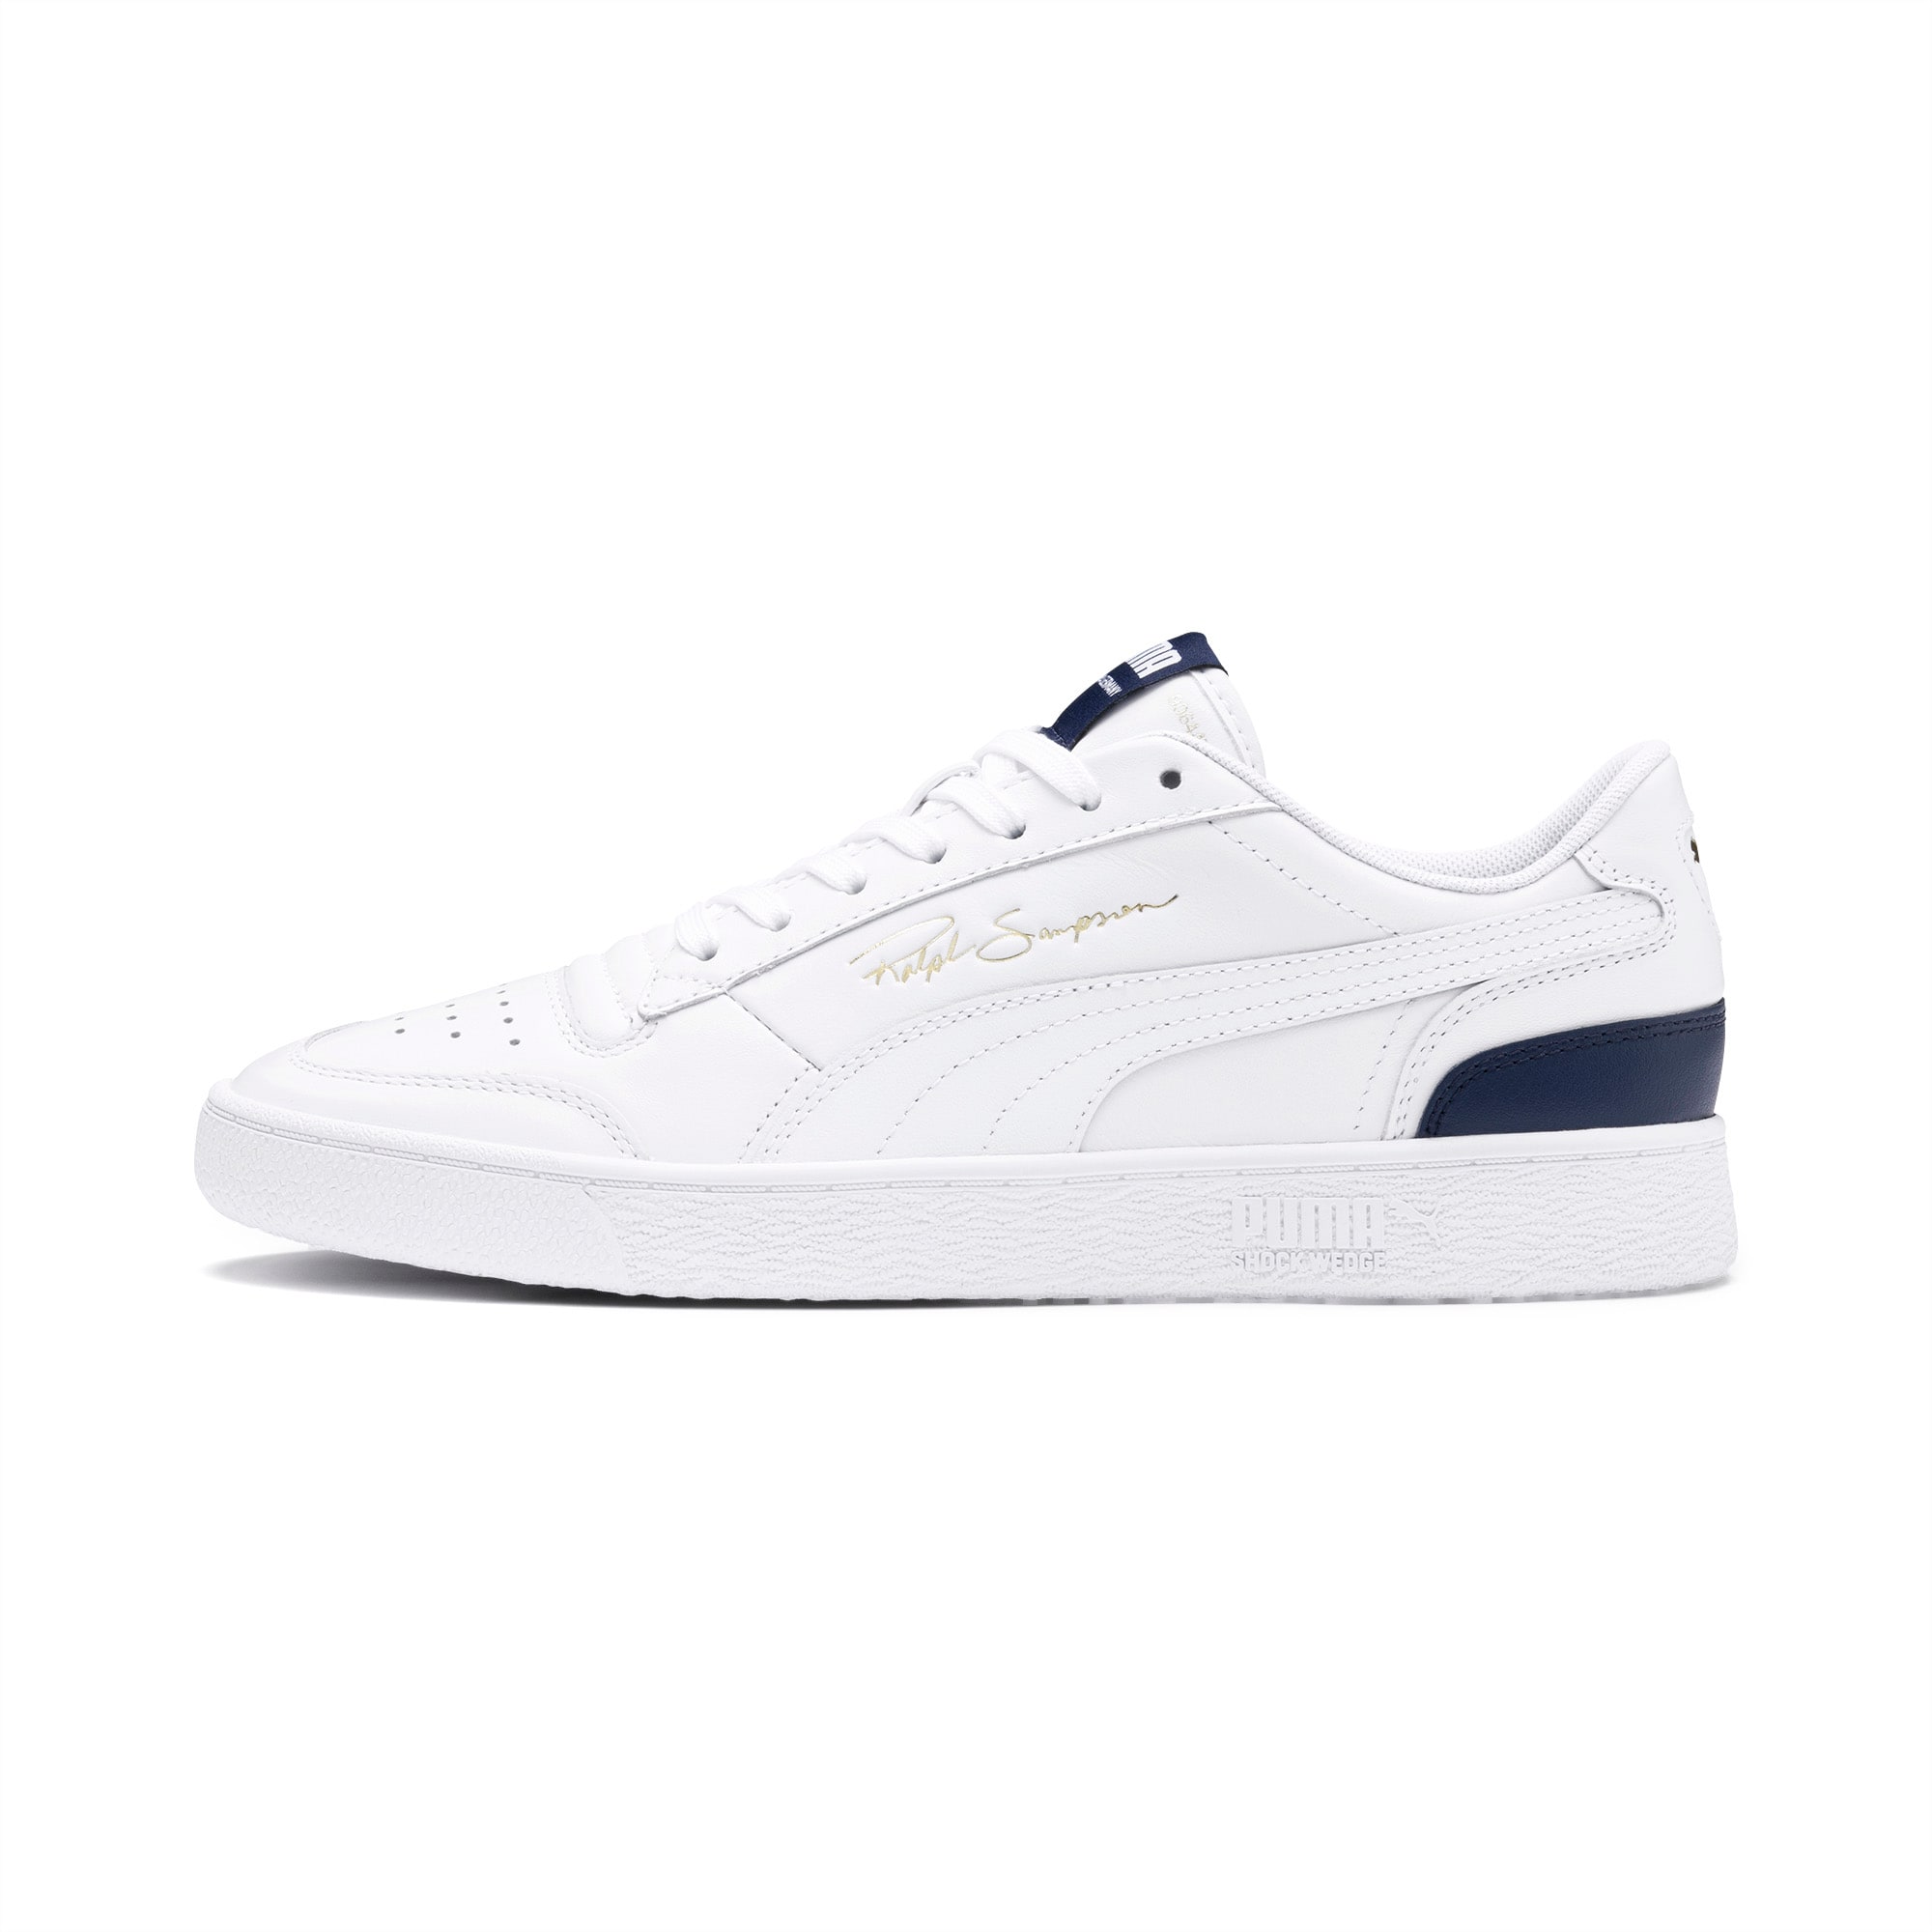 PUMA Chaussure Ralph Sampson Lo sneakers, Blanc/Bleu, Taille 47, Chaussures